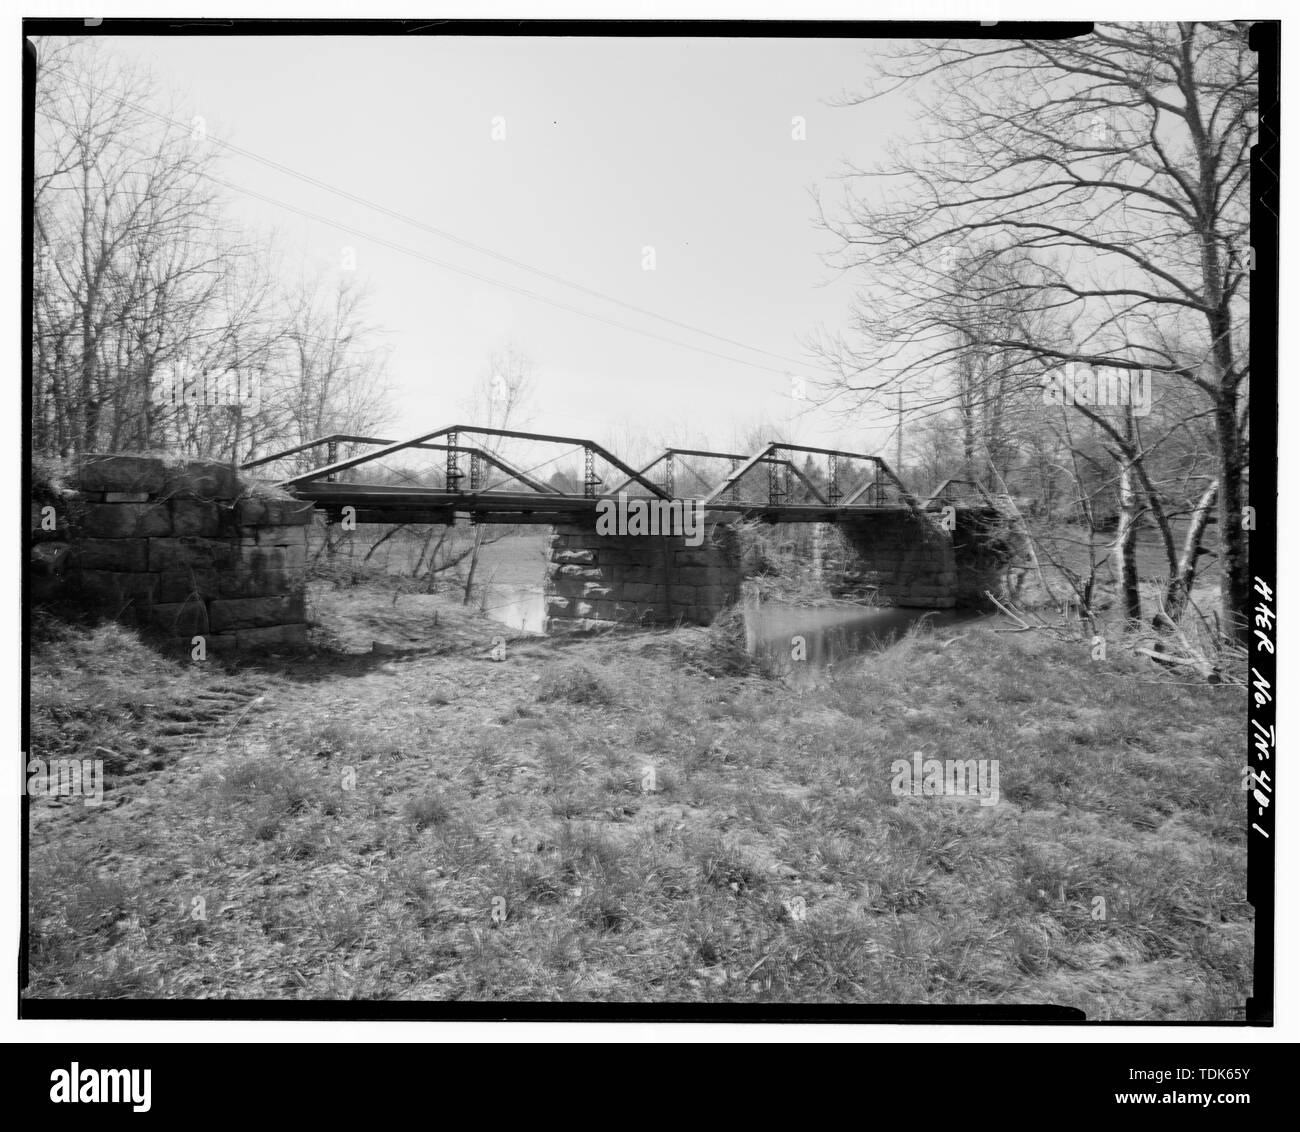 OVERALL ELEVATION, LOOKING SOUTH. - Lea Bridge, Spanning Candies Creek at Old Georgetown Road, Hopewell, Bradley County, TN; Wrought Iron Bridge Company; Converse, W H; Canton Wrought Iron Bridge Company; Hammond , David; Converse Bridge Company; King Iron Bridge Company; Hornal, George, photographer; Carver, Martha, historian Stock Photo